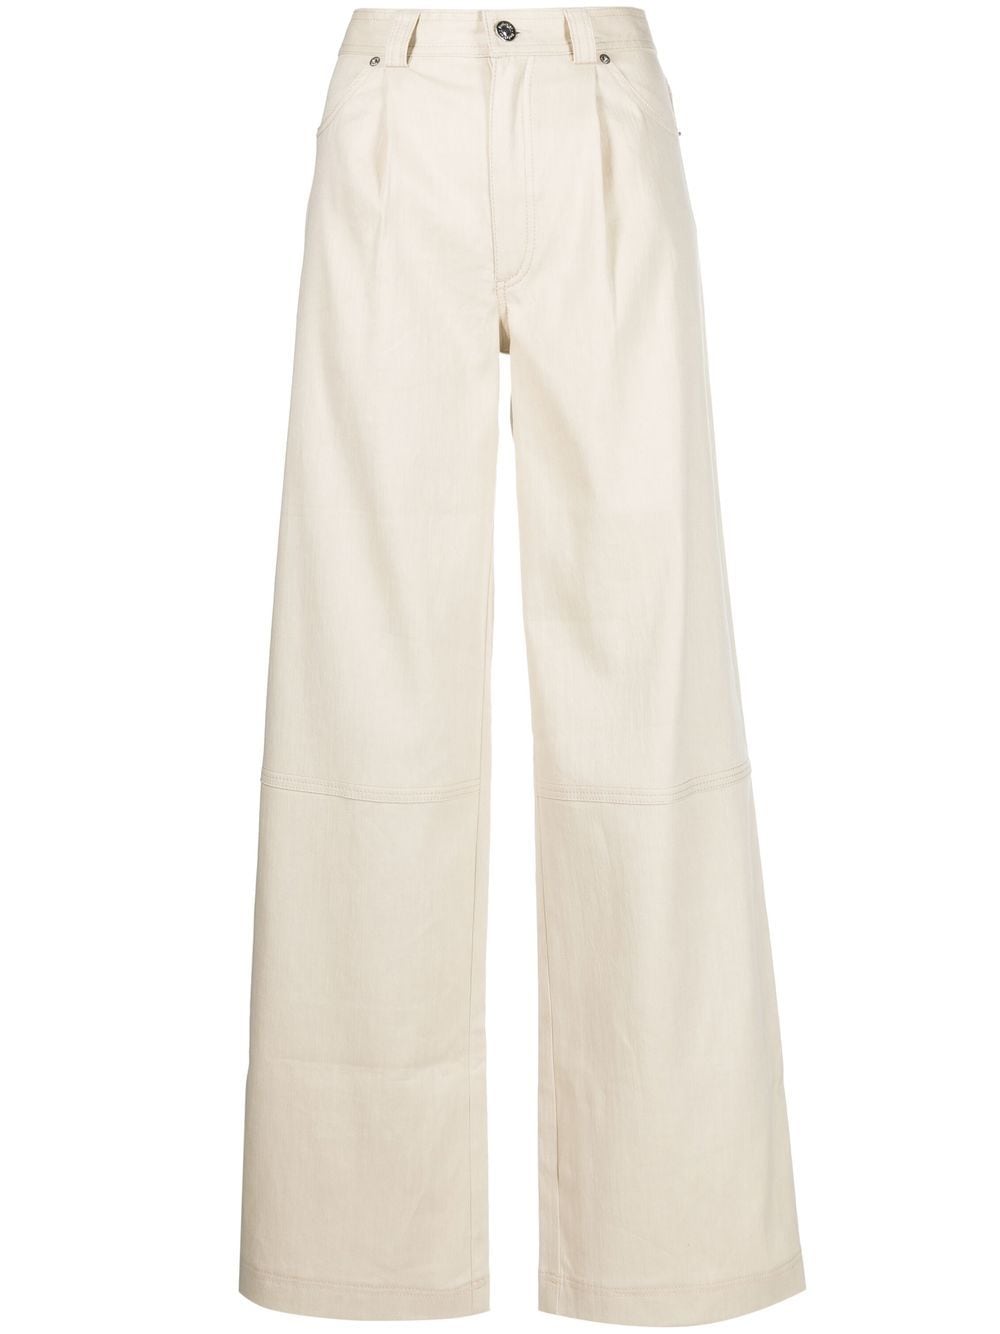 RODEBJER BELTED PALZZO PANTS